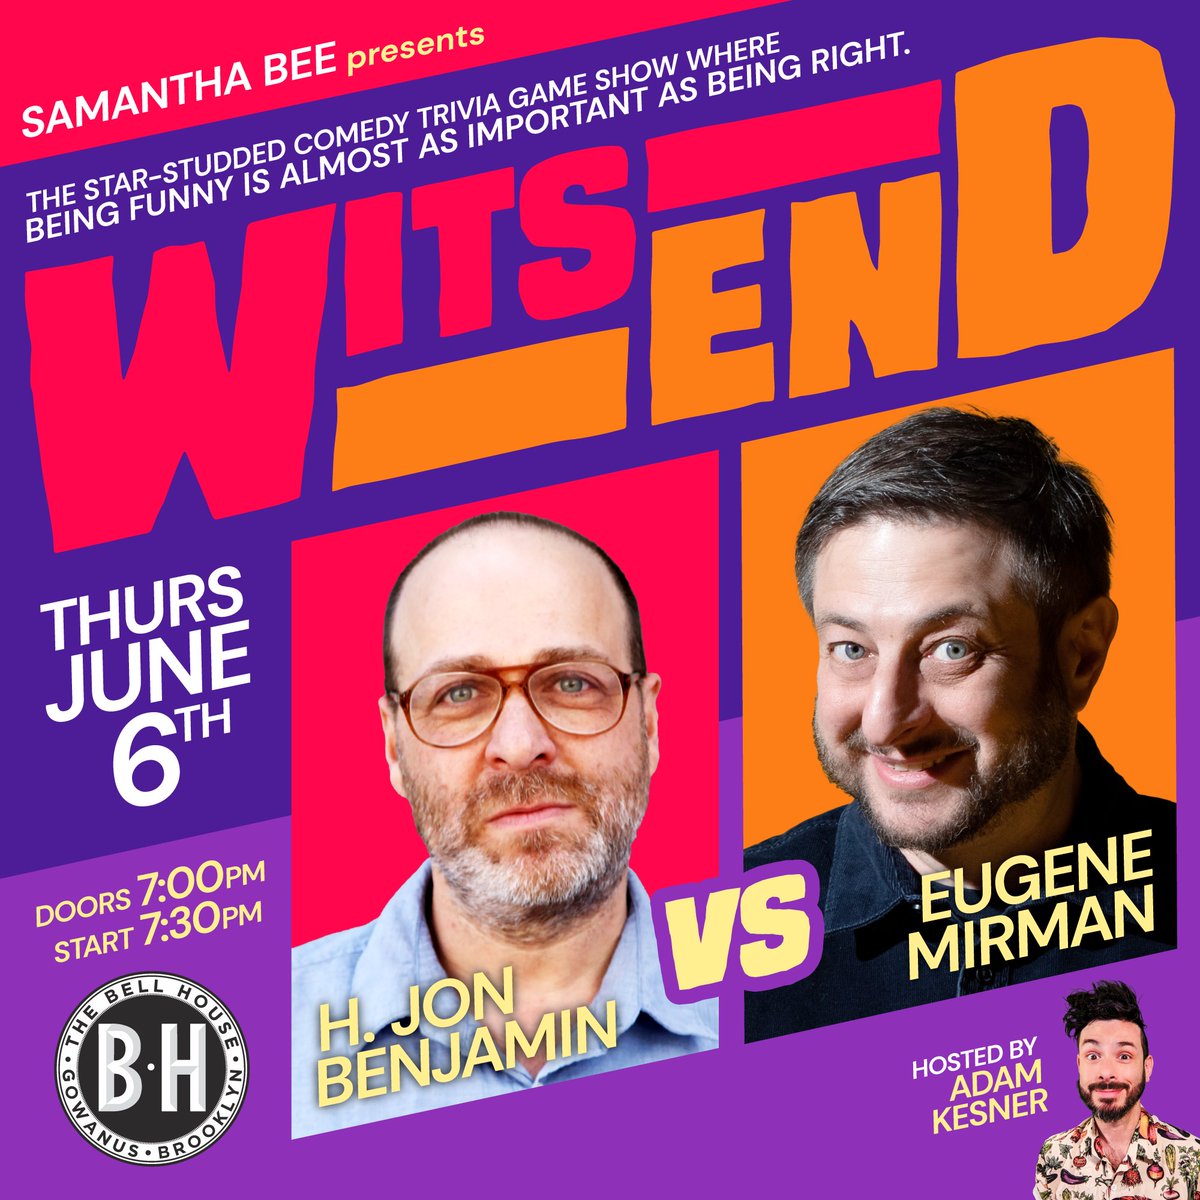 JUST ANNOUNCED! @iamsambee Presents WITS END with H. Jon Benjamin and @EugeneMirman on Thursday, June 6th! WITS END is a game show where 2 celebrity comedians face off in a game of custom-made trivia, created & hosted by Adam Kesner! Tickets on sale now: tinyurl.com/4d7p74fa